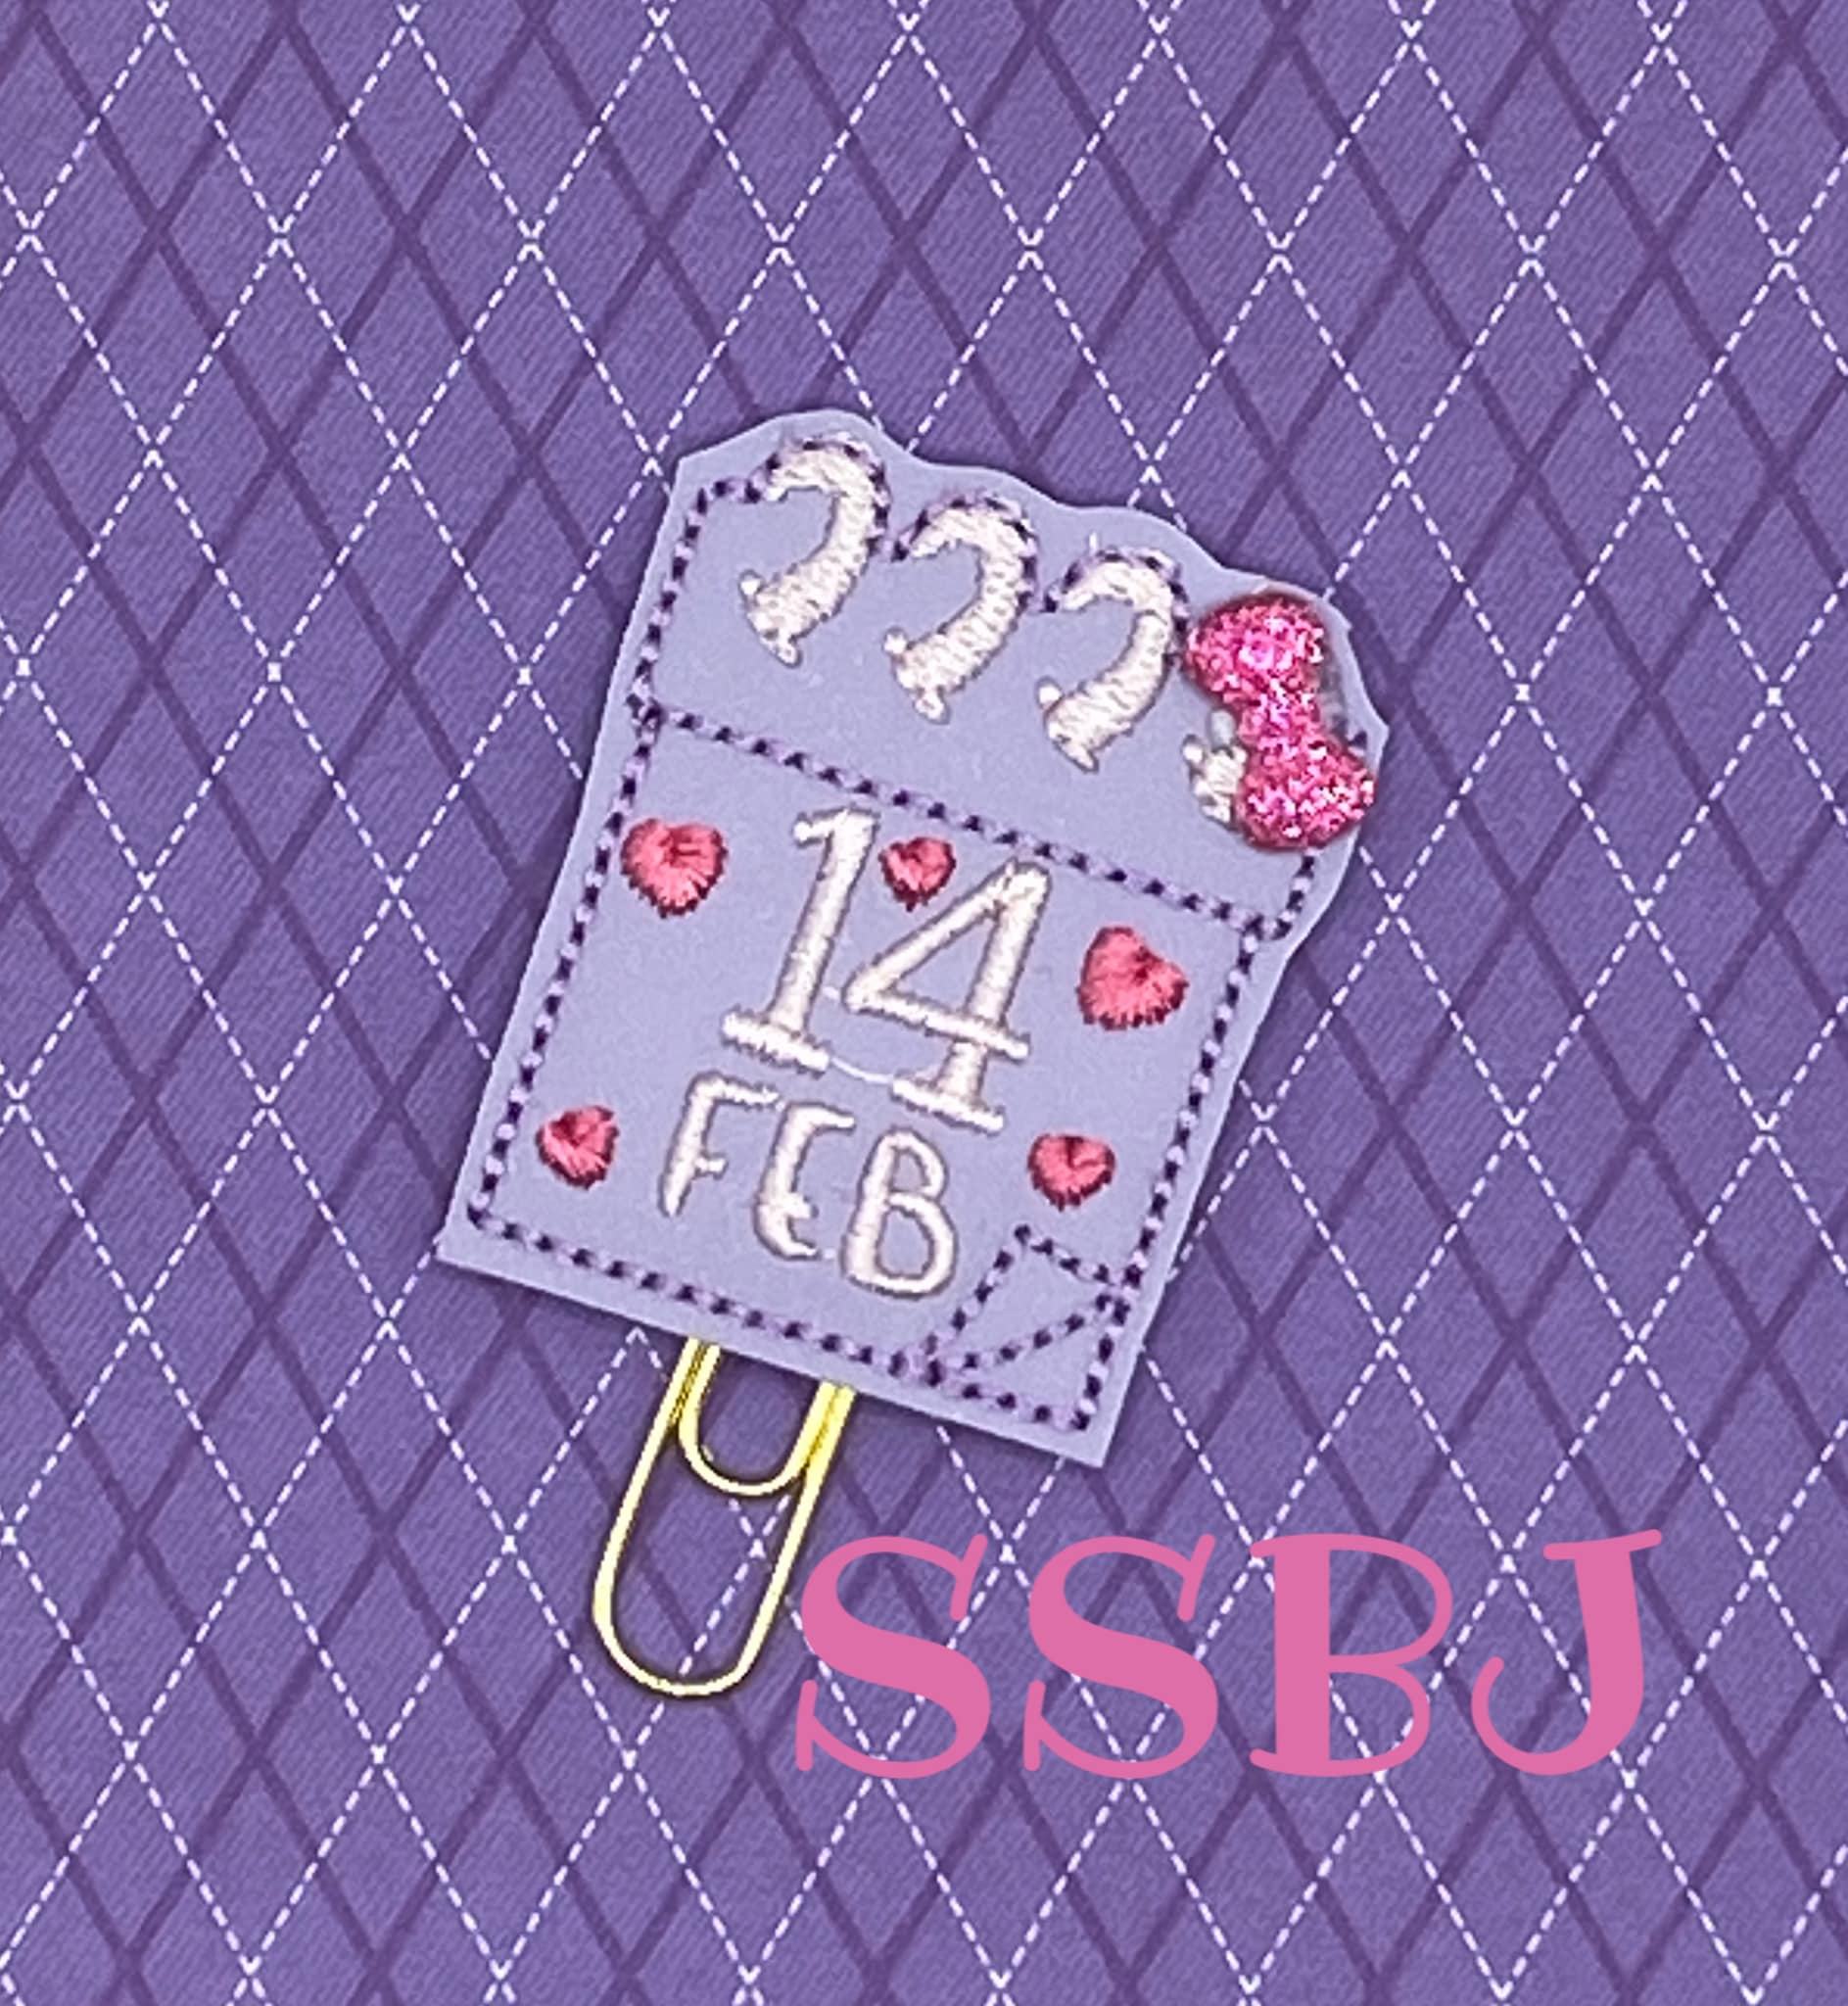 SSBJ Date with Love Embroidery File